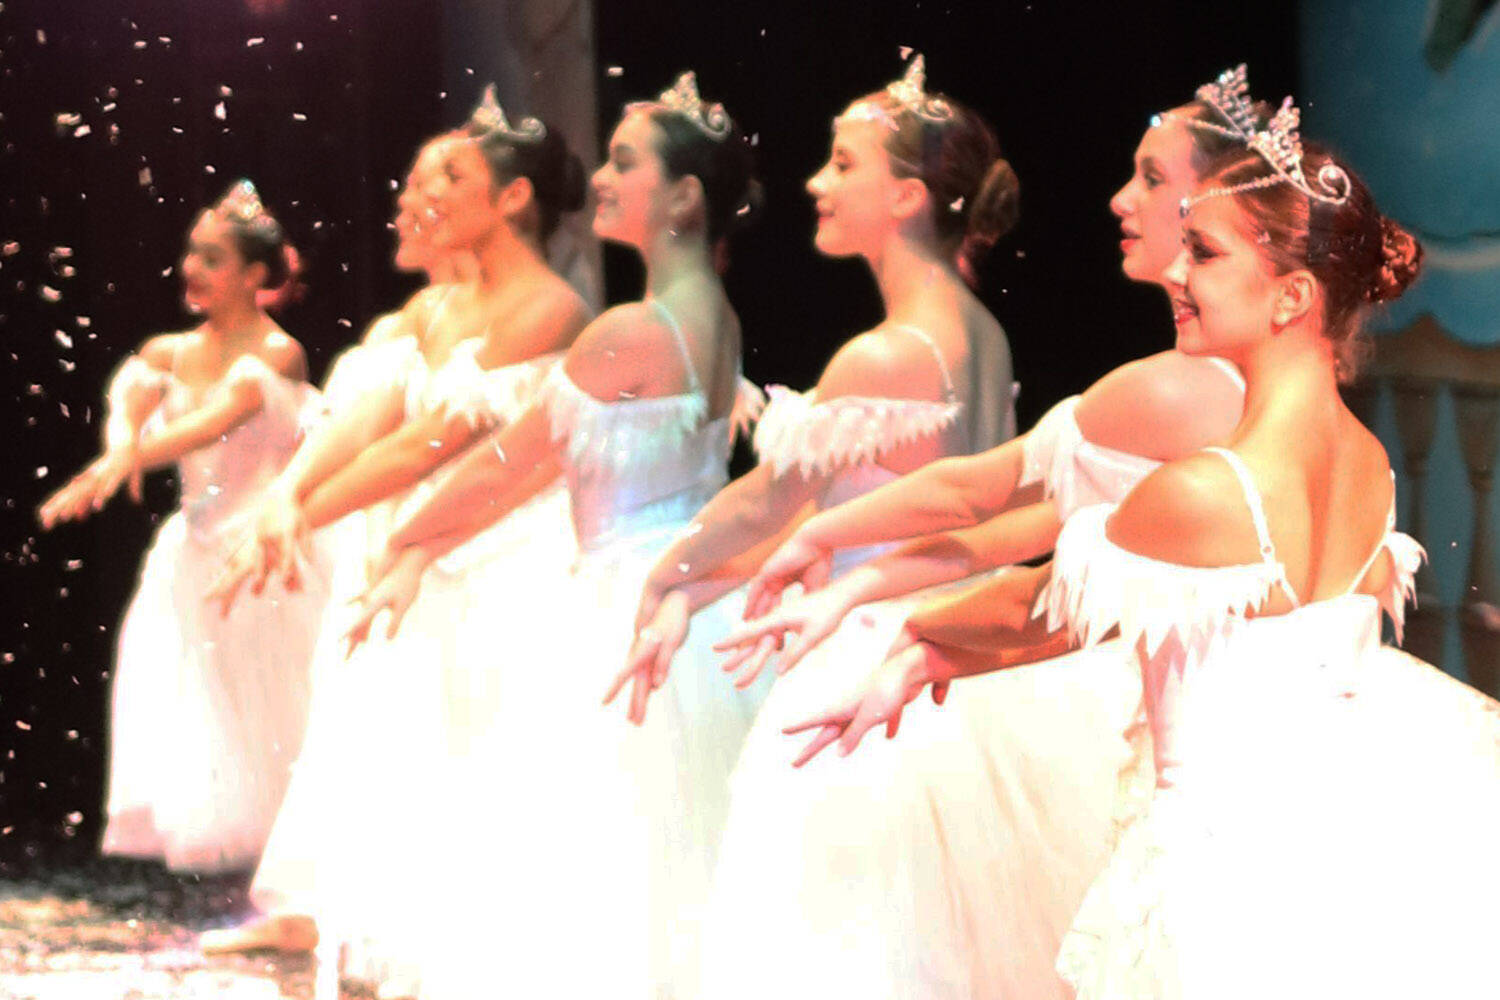 Sara DeVolld, right, performs as part of the Snow Corps in “The Nutcracker” with Eugene Ballet at the Alaska Center for the Performing Arts in Anchorage, Alaska. (Photo courtesy Shona DeVolld)